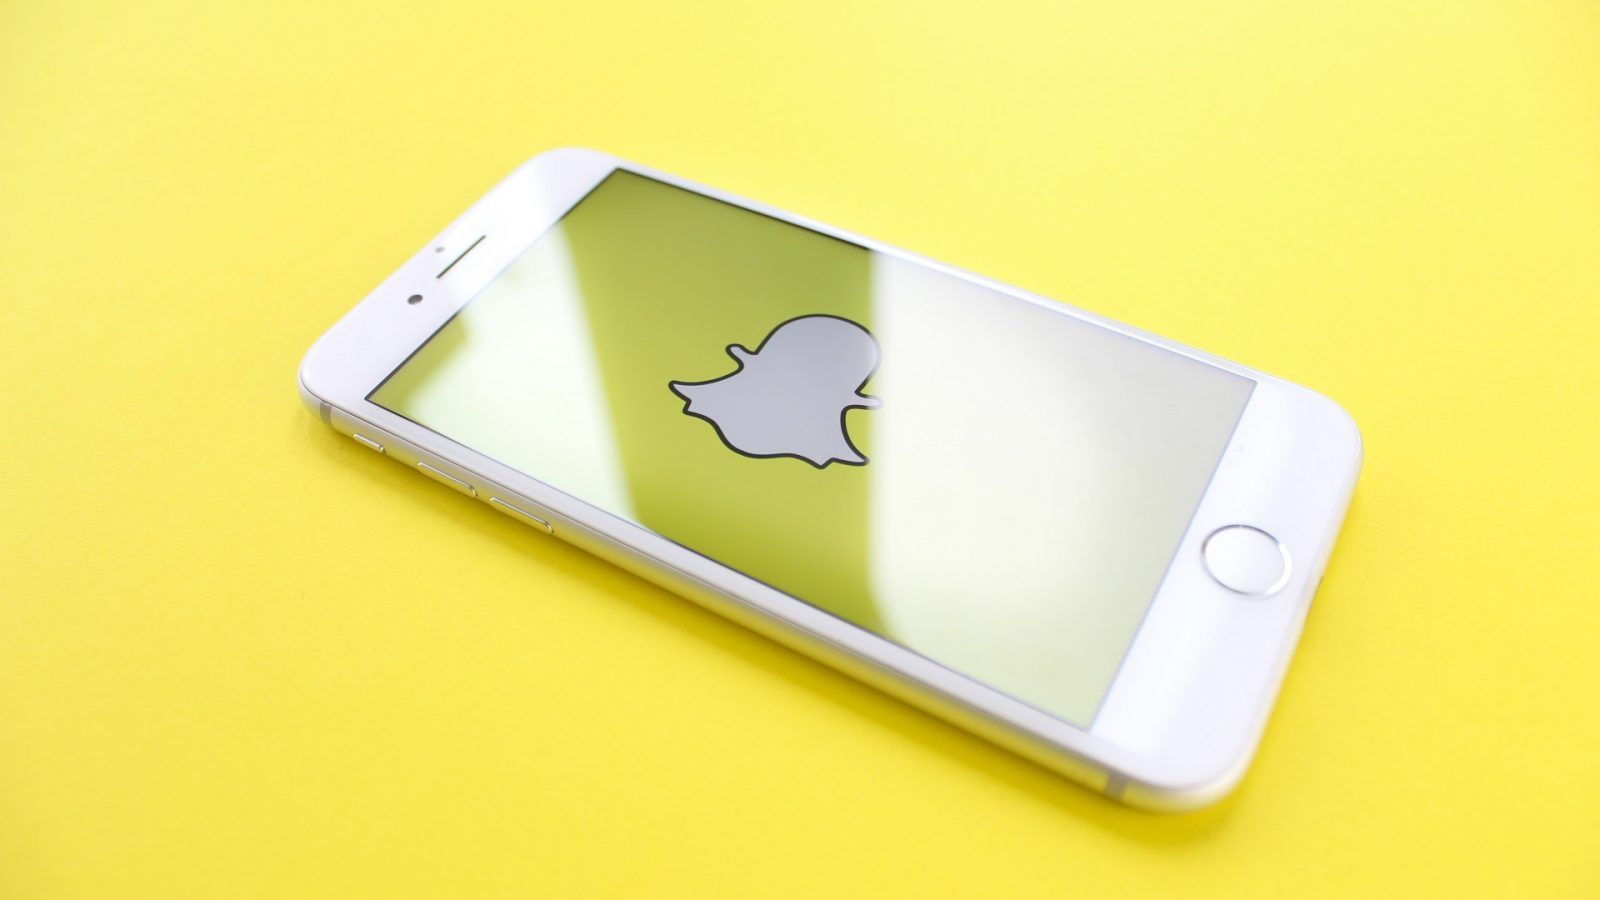 All the new Snapchat updates worth taking note of